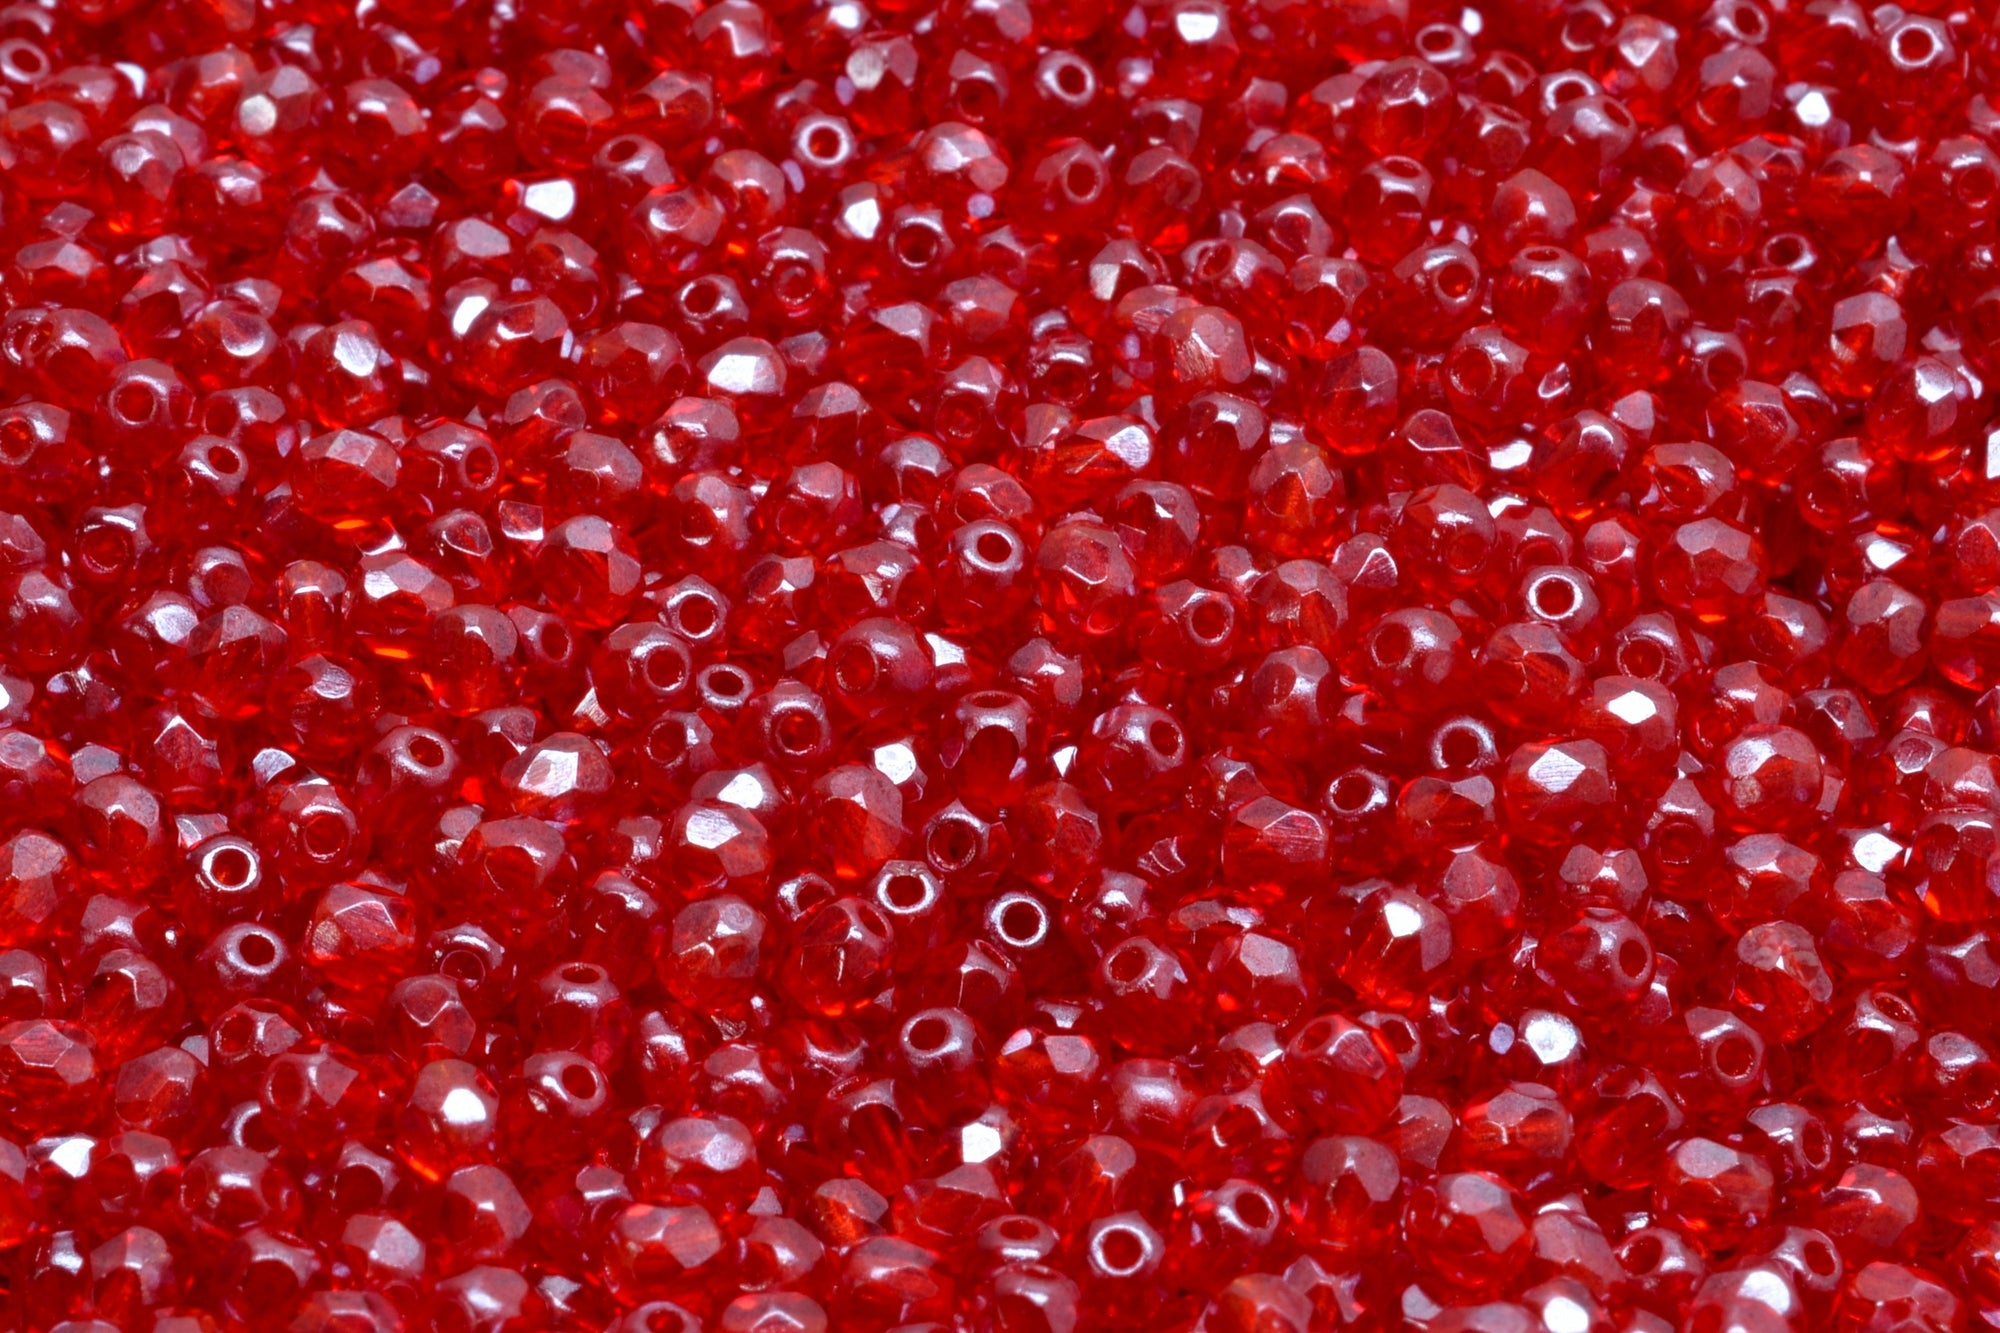 3mm Czech Fire Polish Beads, Siam Ruby Luster, 50 pieces